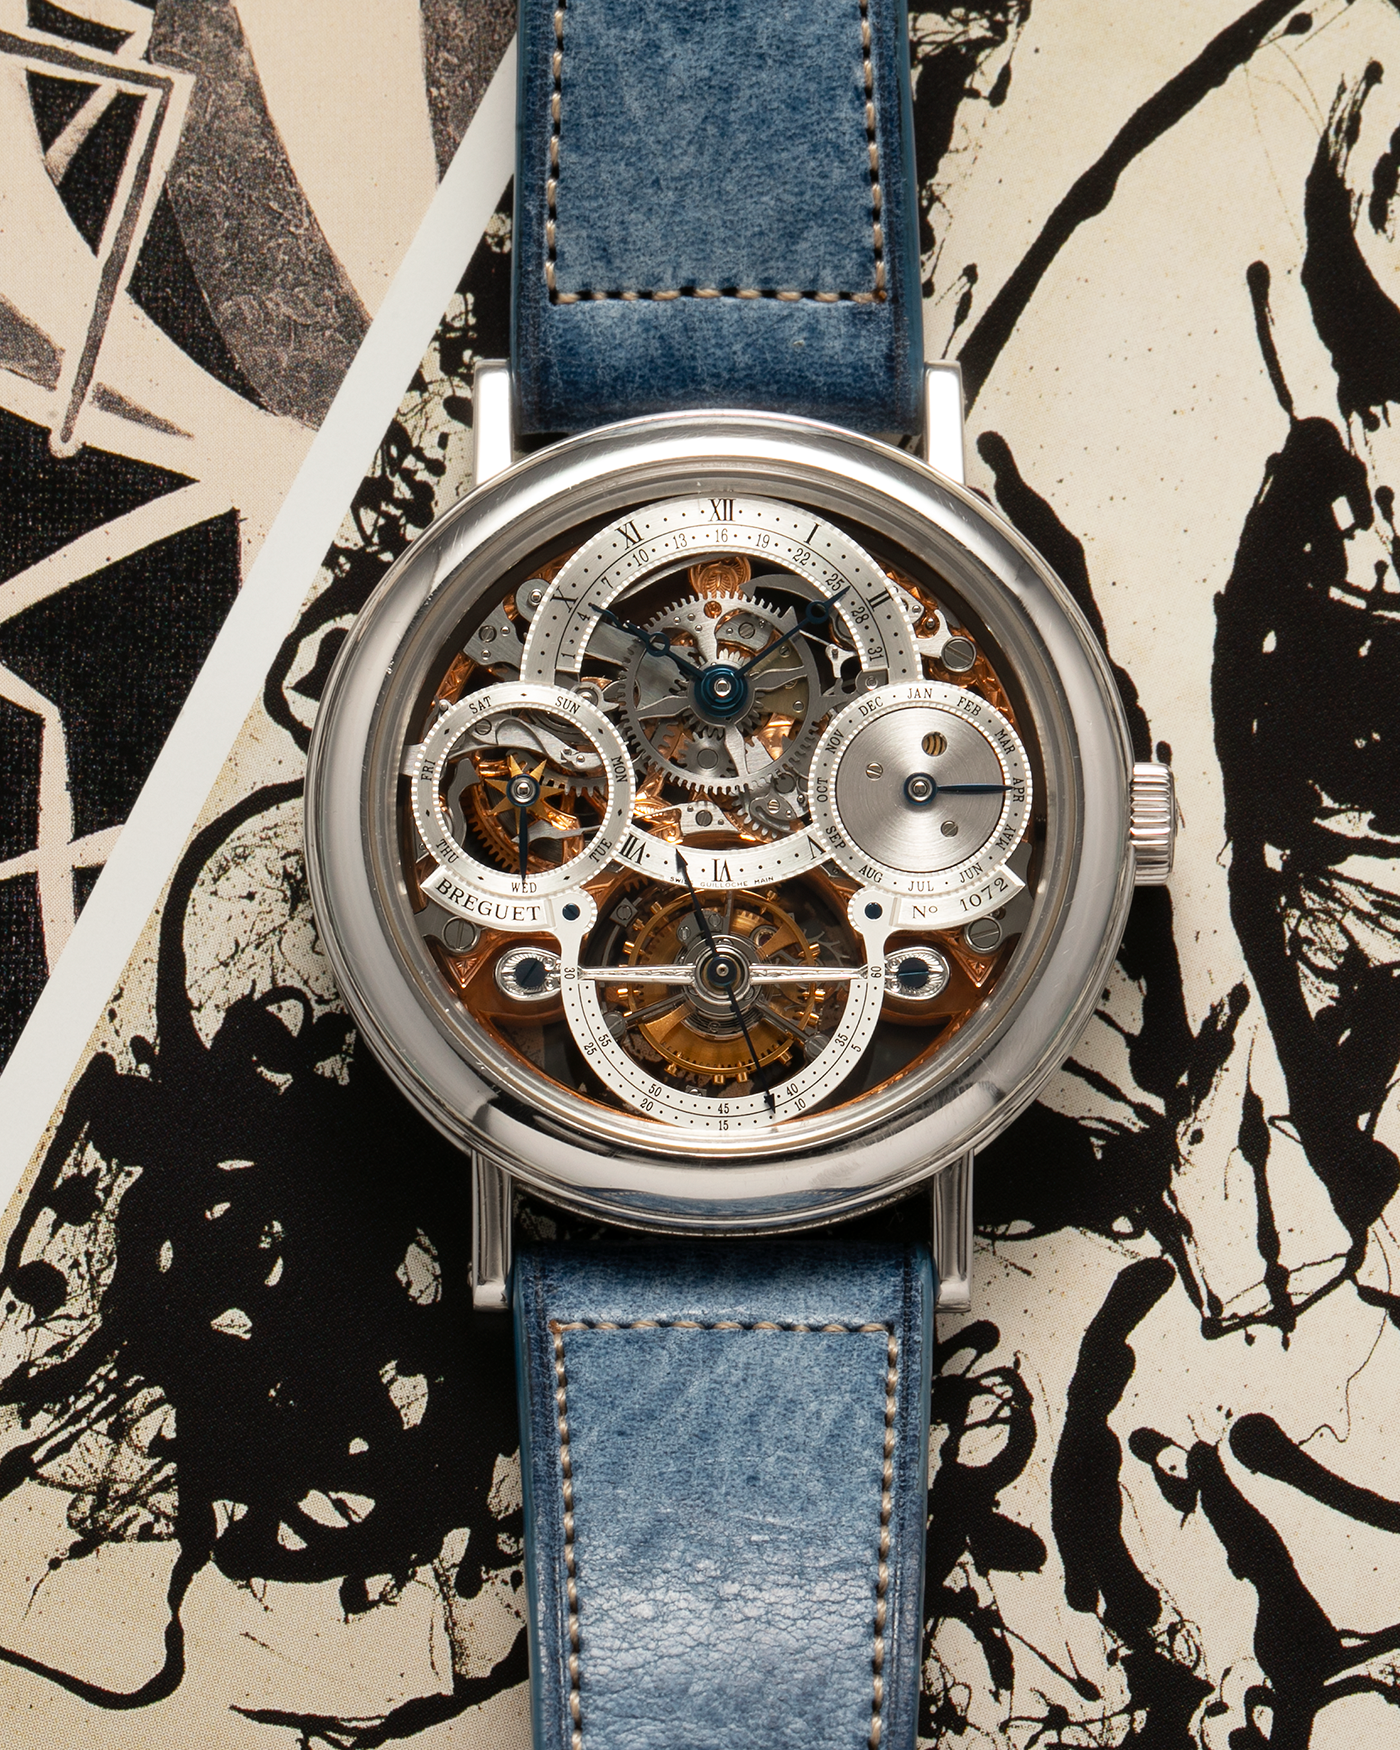 Brand: Breguet Year: 2000s Model: Classique Perpetual Calendar Tourbillon Reference Number: 3755 Material: Platinum 950 Movement: Breguet Cal. 558QPSQ, Manual-Winding Case Diameter: 40mm Lug Width: 20mm Strap: Strapology Denim Blue Calf Leather Strap with Signed Platinum 950 Deployant Buckle